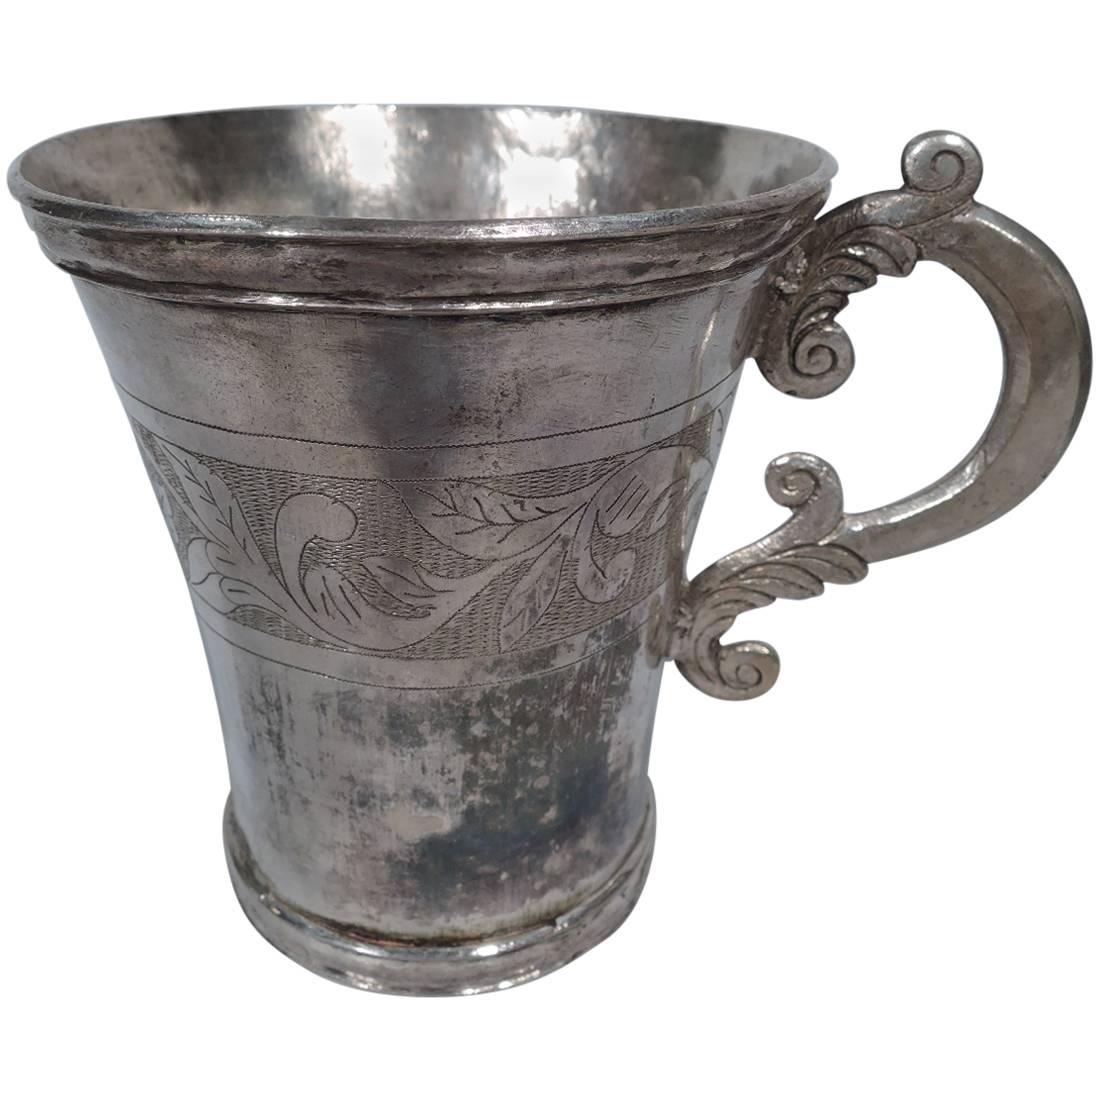 Antique South American Silver Mug with Scrolls and Leaves